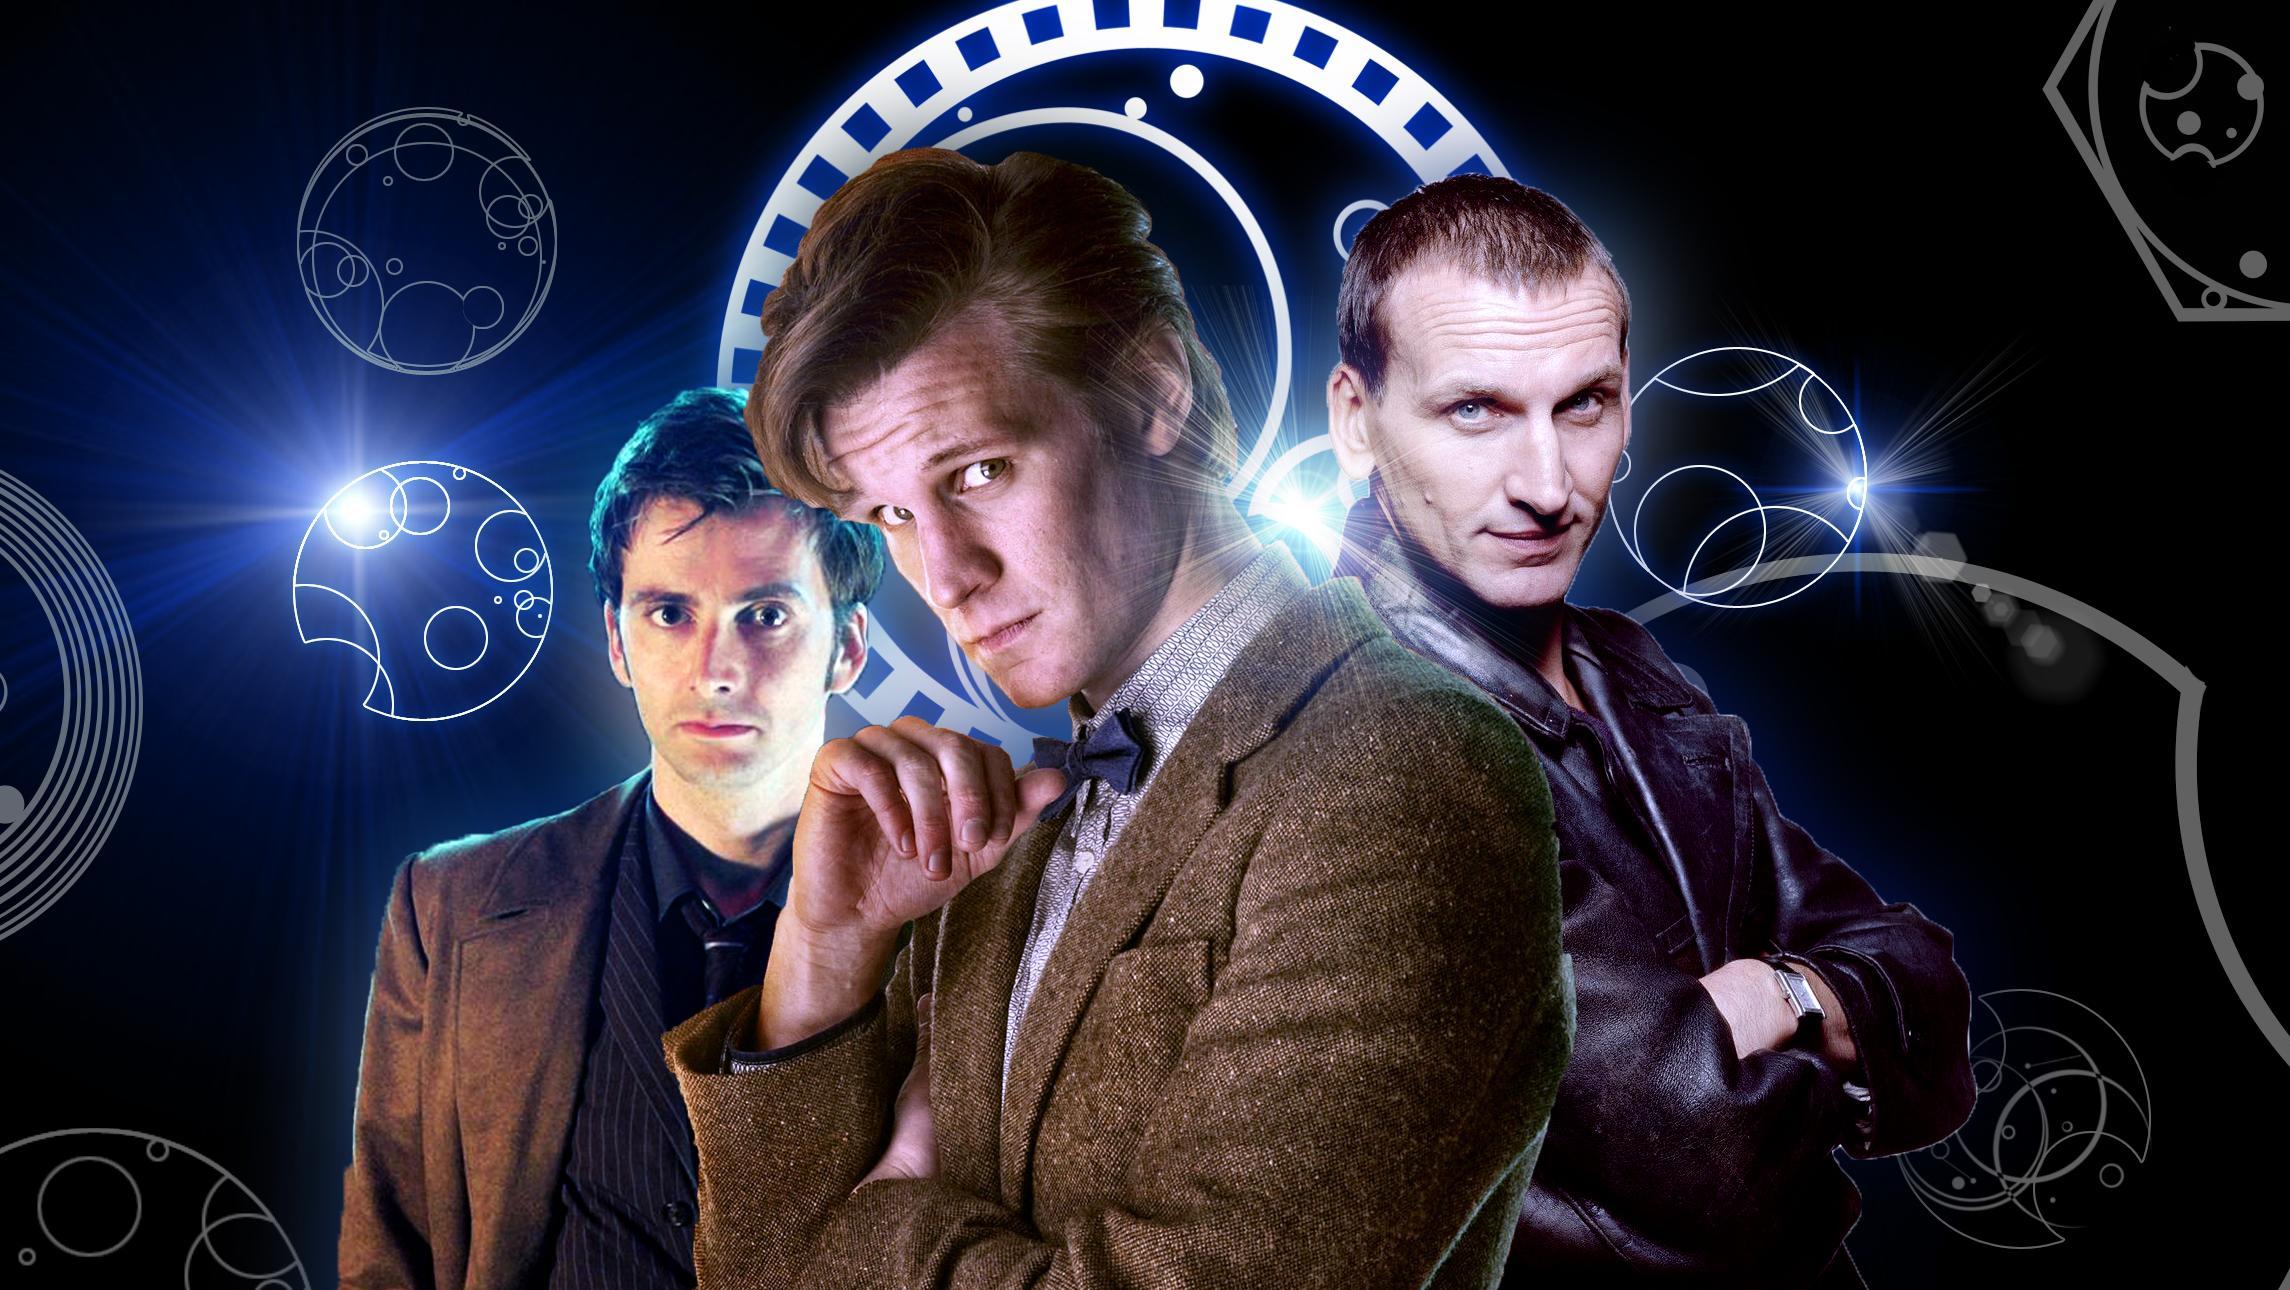 10th doctor wallpaper,human,photography,space,flash photography,movie